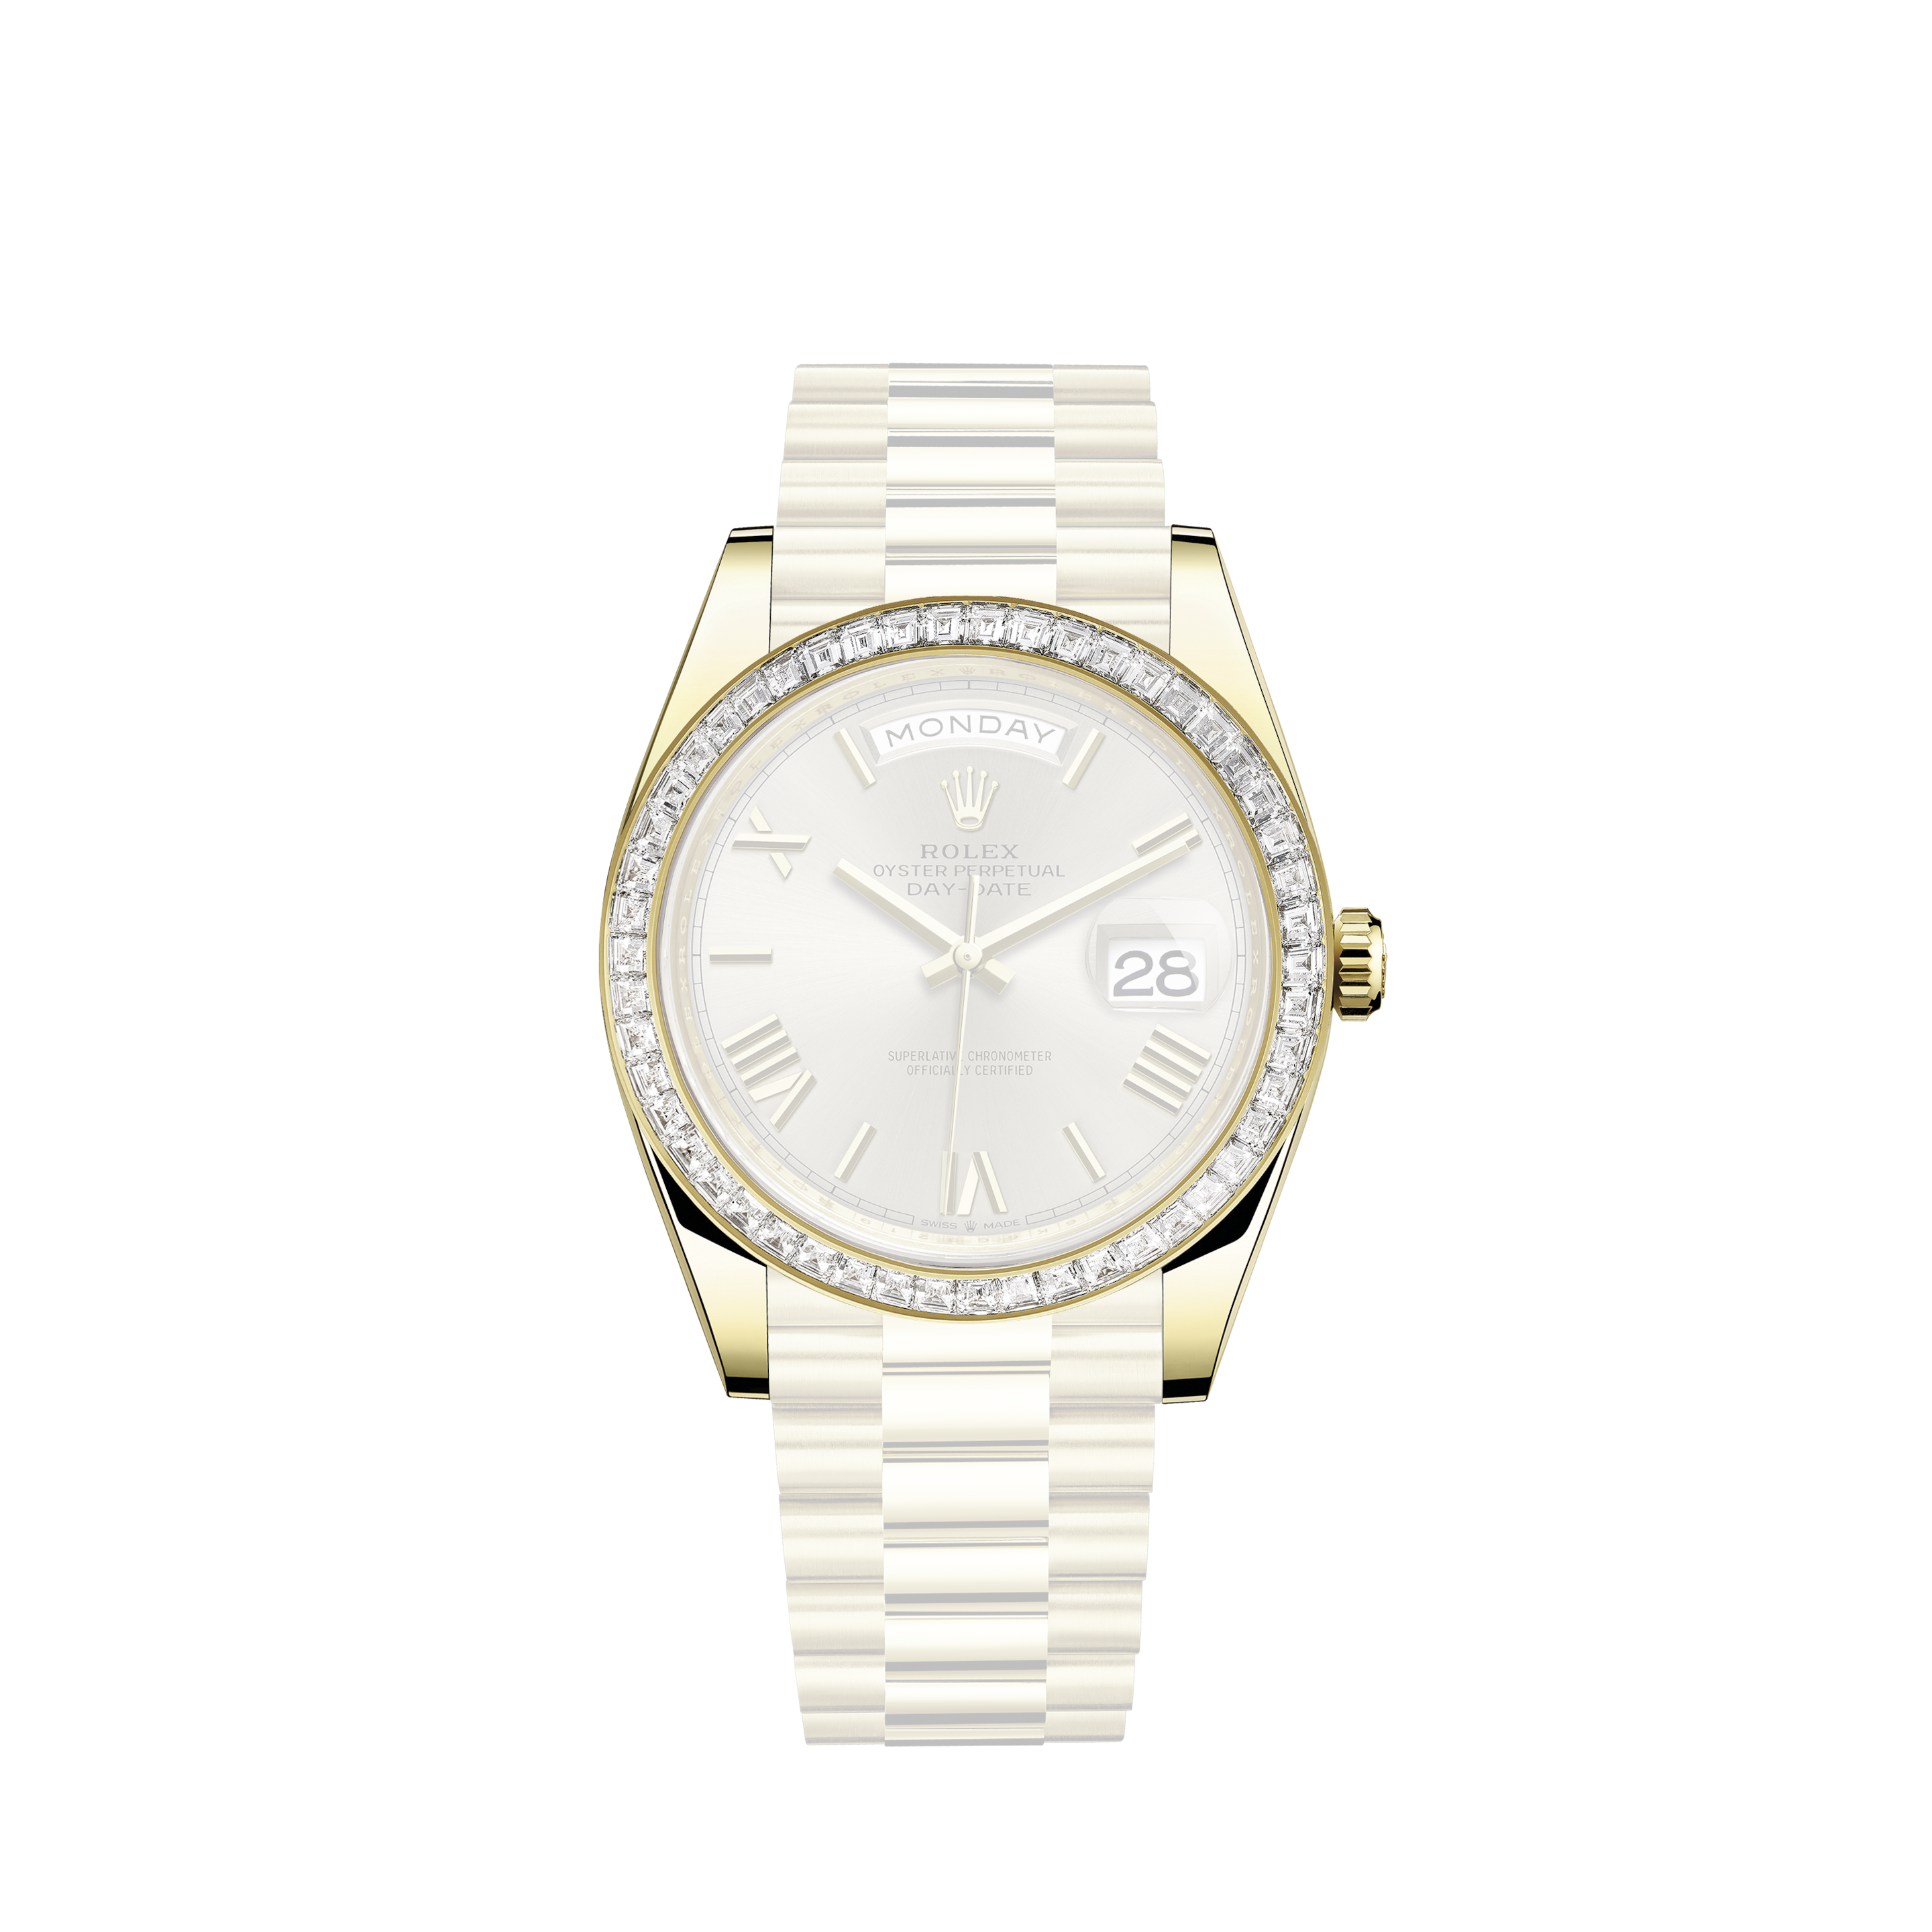 Rolex Day-Date 36 18038 Diamond/baguette dial ( 1979 )Rolex Day-Date 36 18239 1990 18krt White Gold Mint Condition